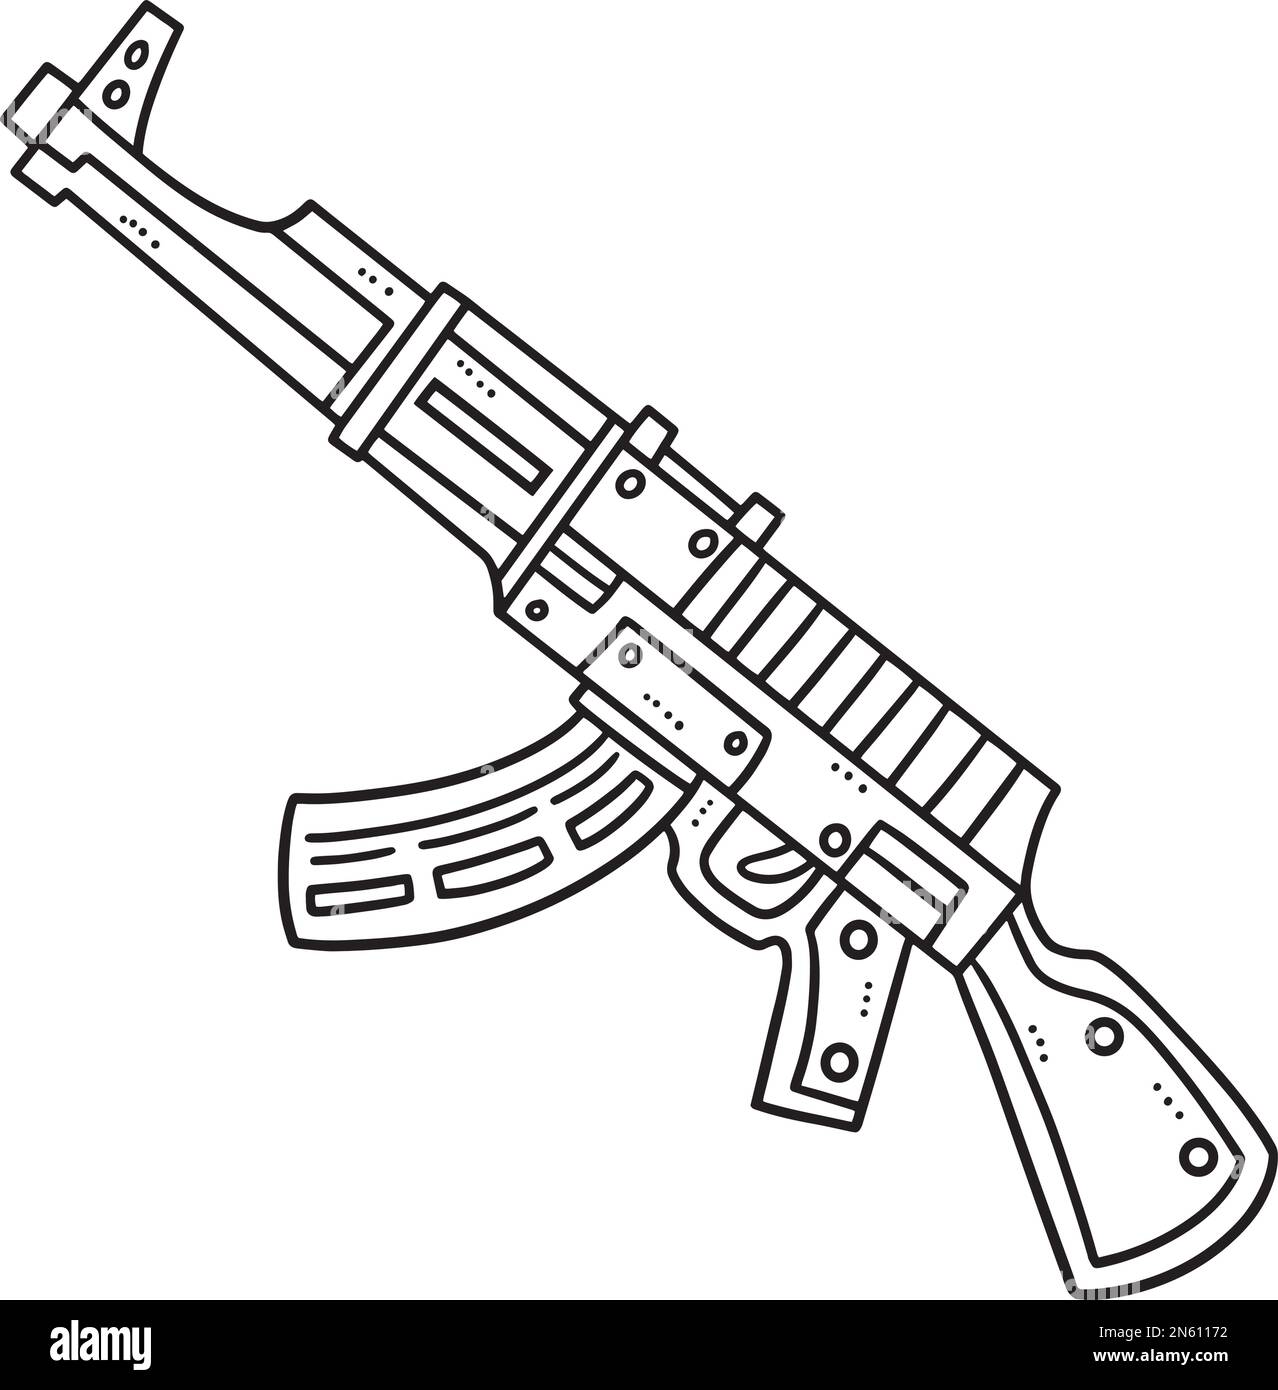 Submachine Gun Isolated Coloring Page for Kids Stock Vektor